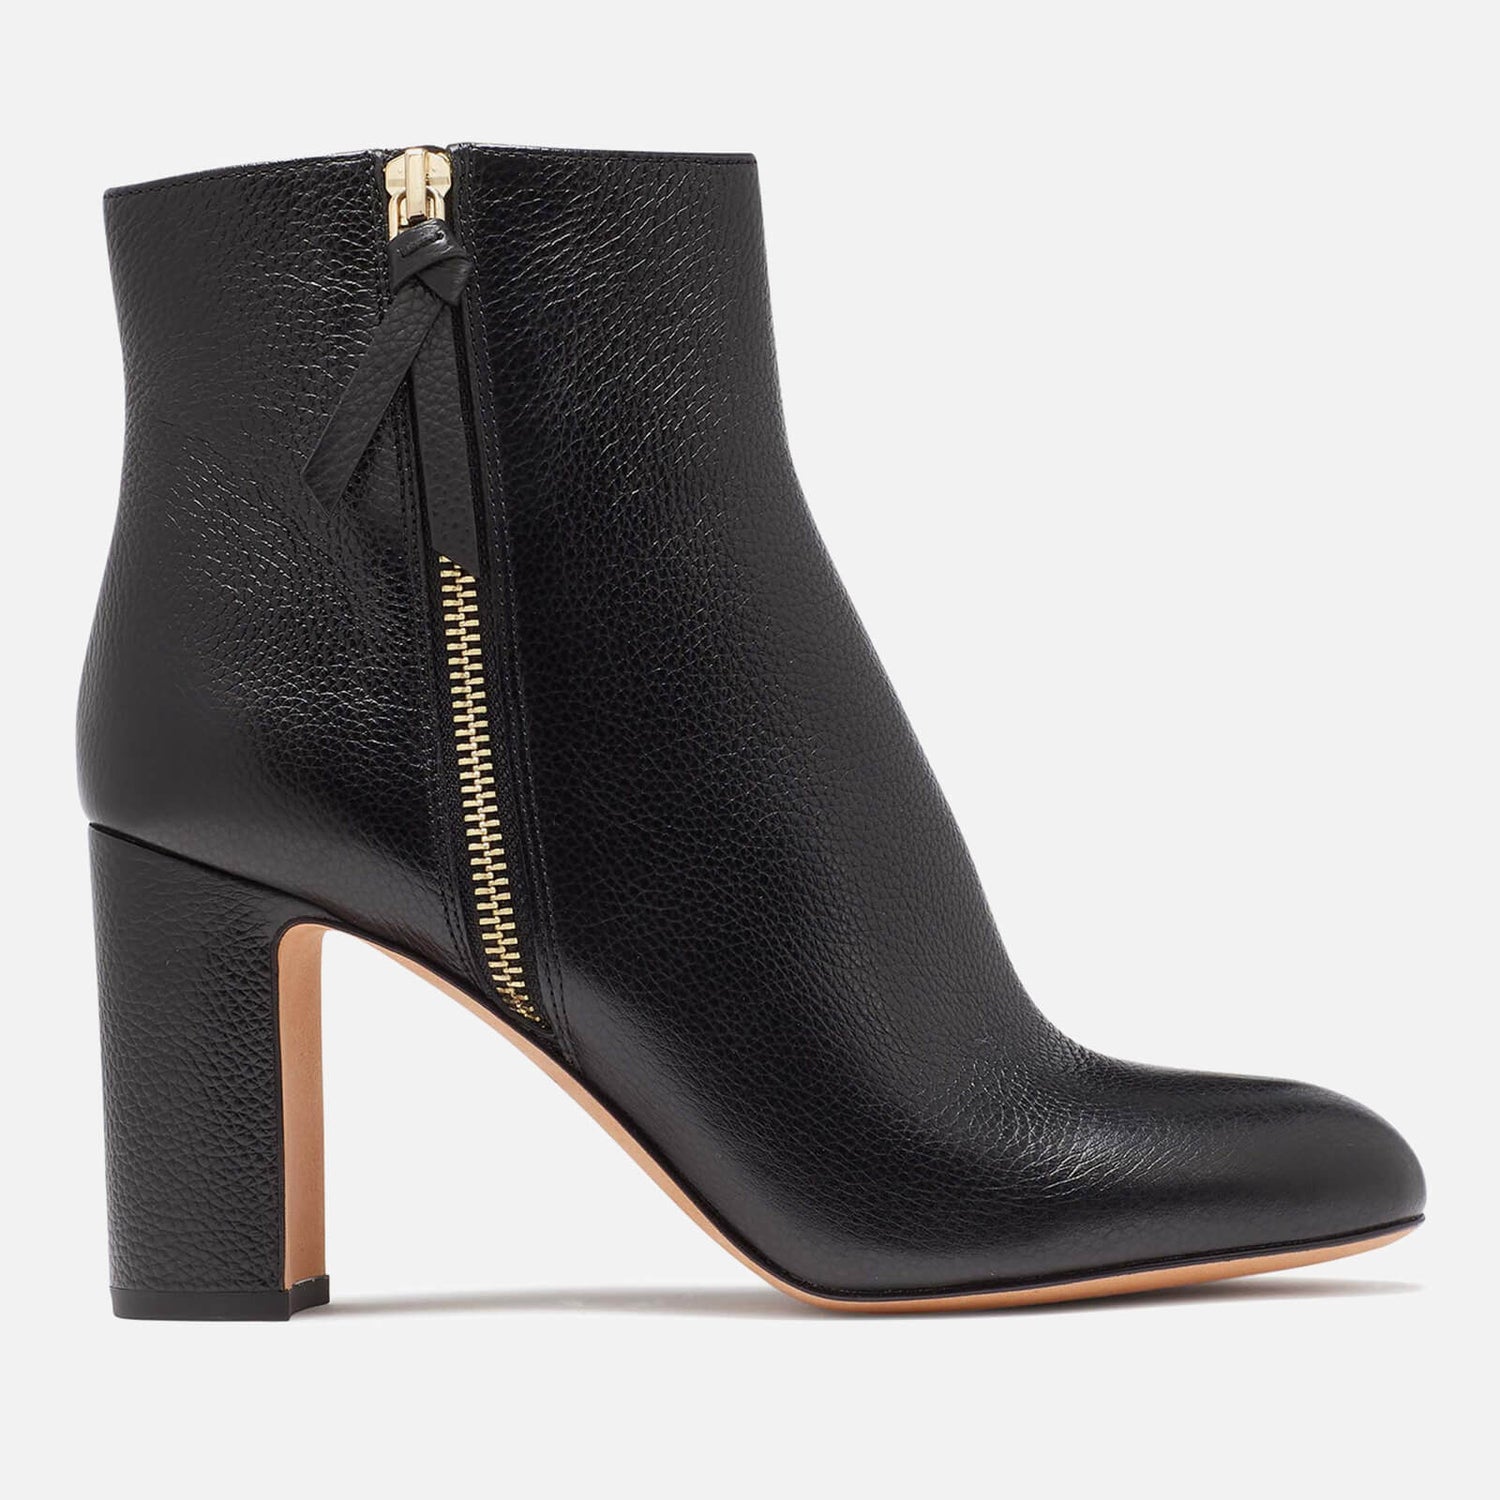 Kate Spade New York Women's Leather Heeled Ankle Boots - UK 3